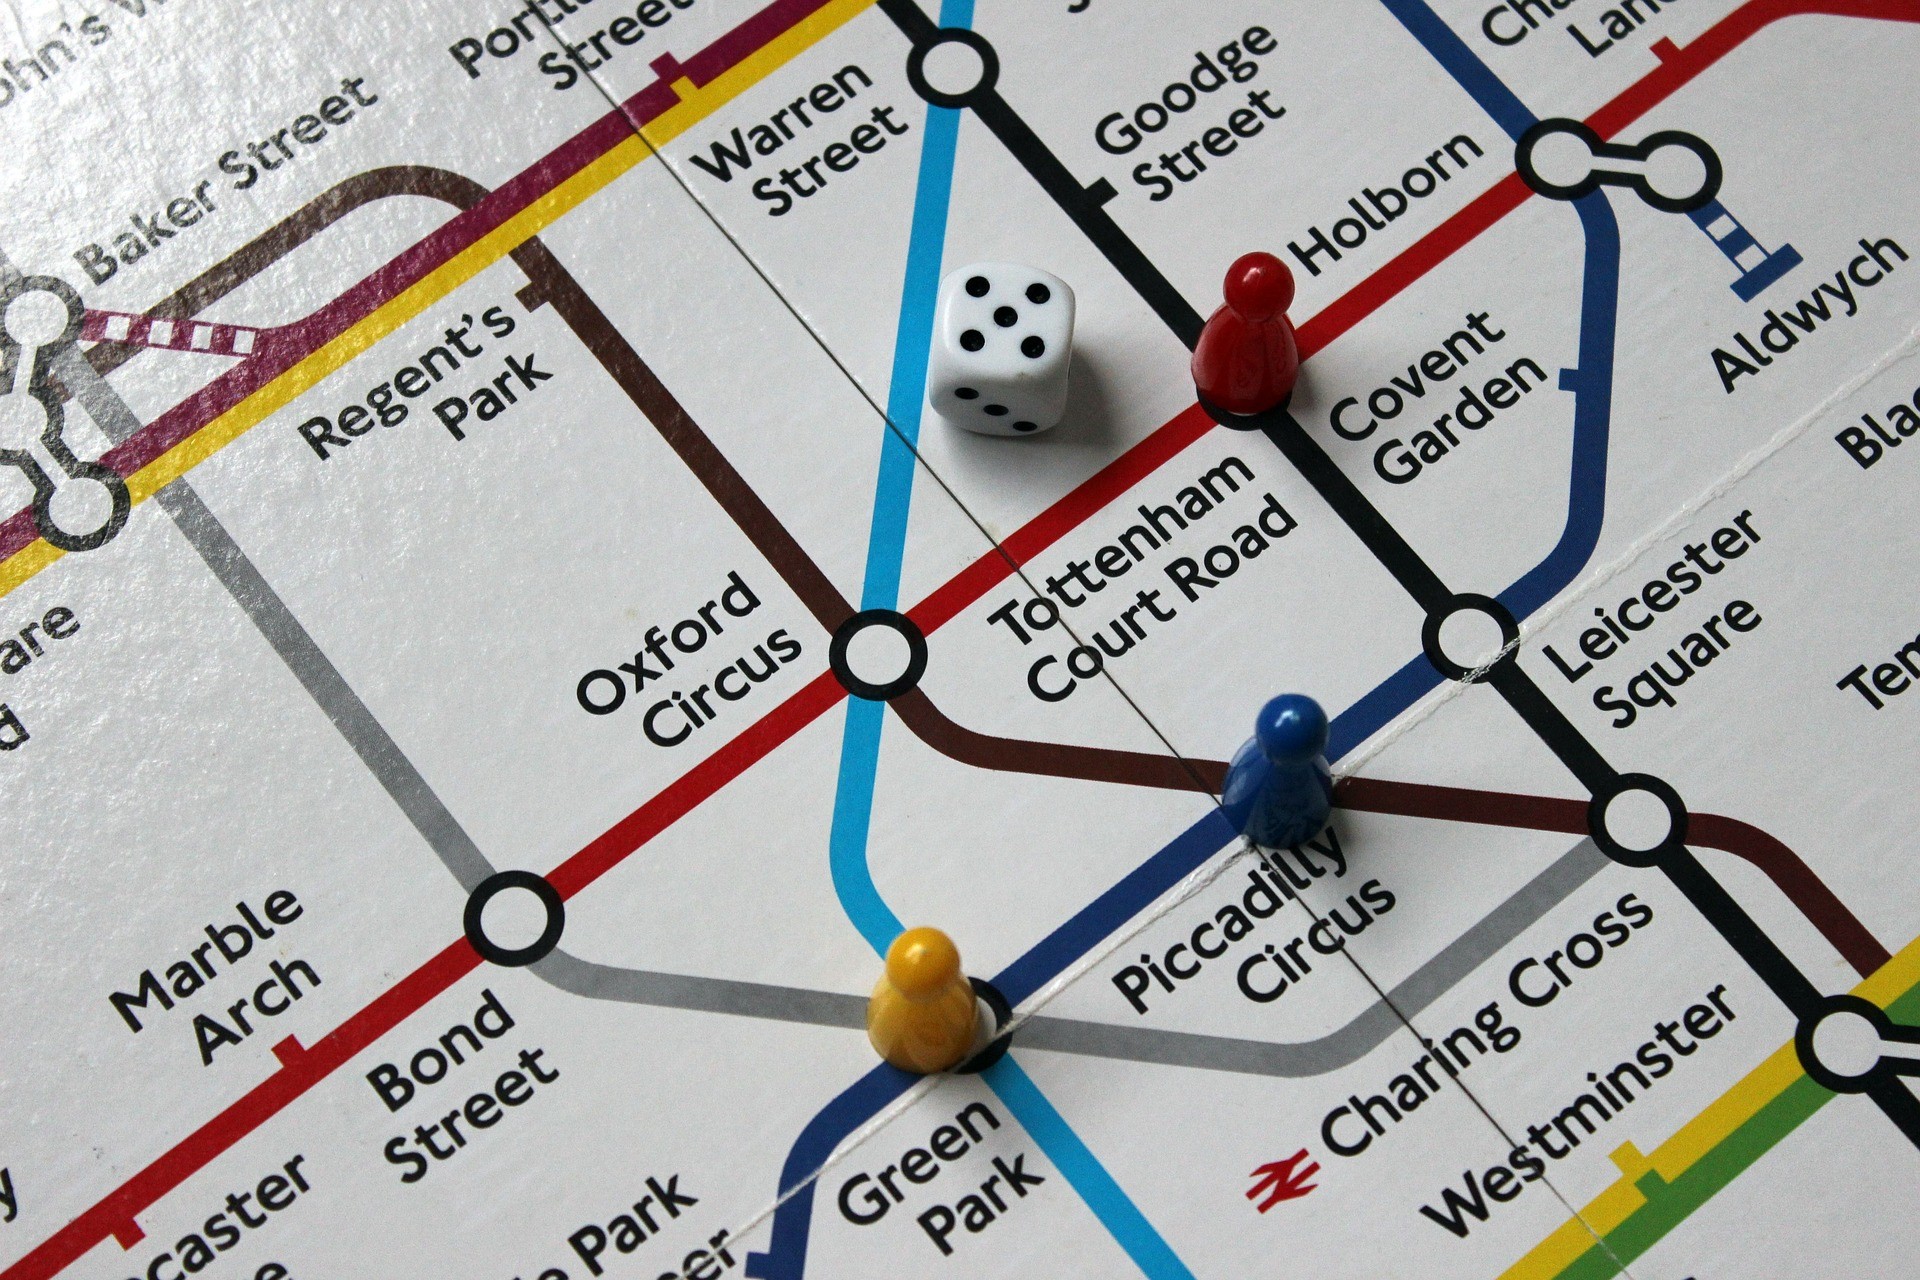 15 tips for London Underground first-timers